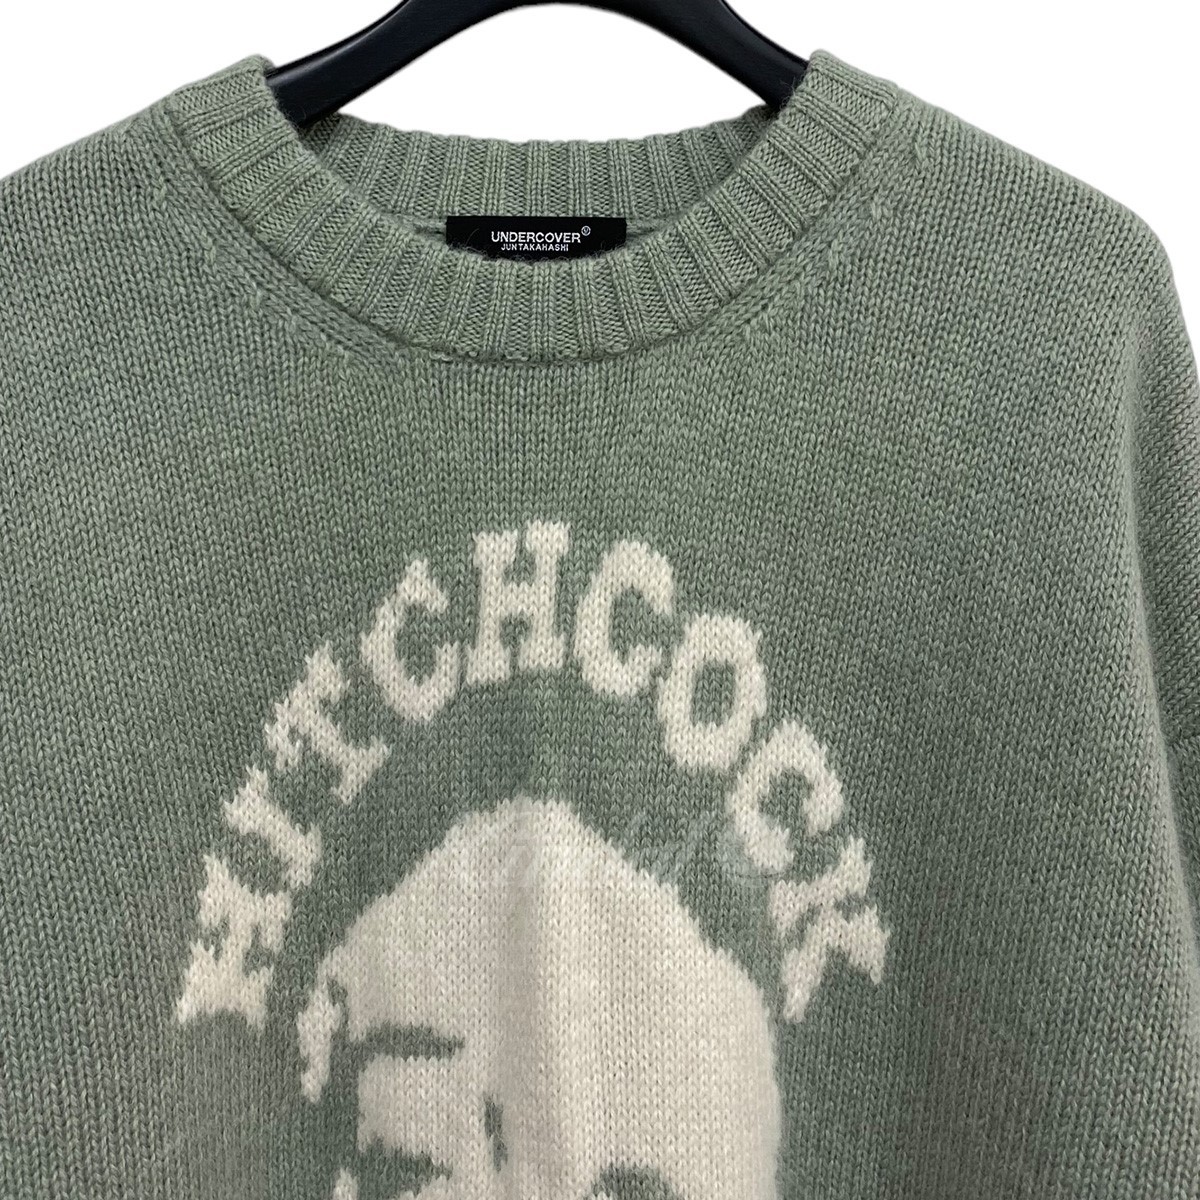 UNDER COVER×Alfred Hitchcock　 22AW Hitchcock Face Crewneck Knitヒッチコック刺繍ニットセーター 商品番号：8069000075038_画像4